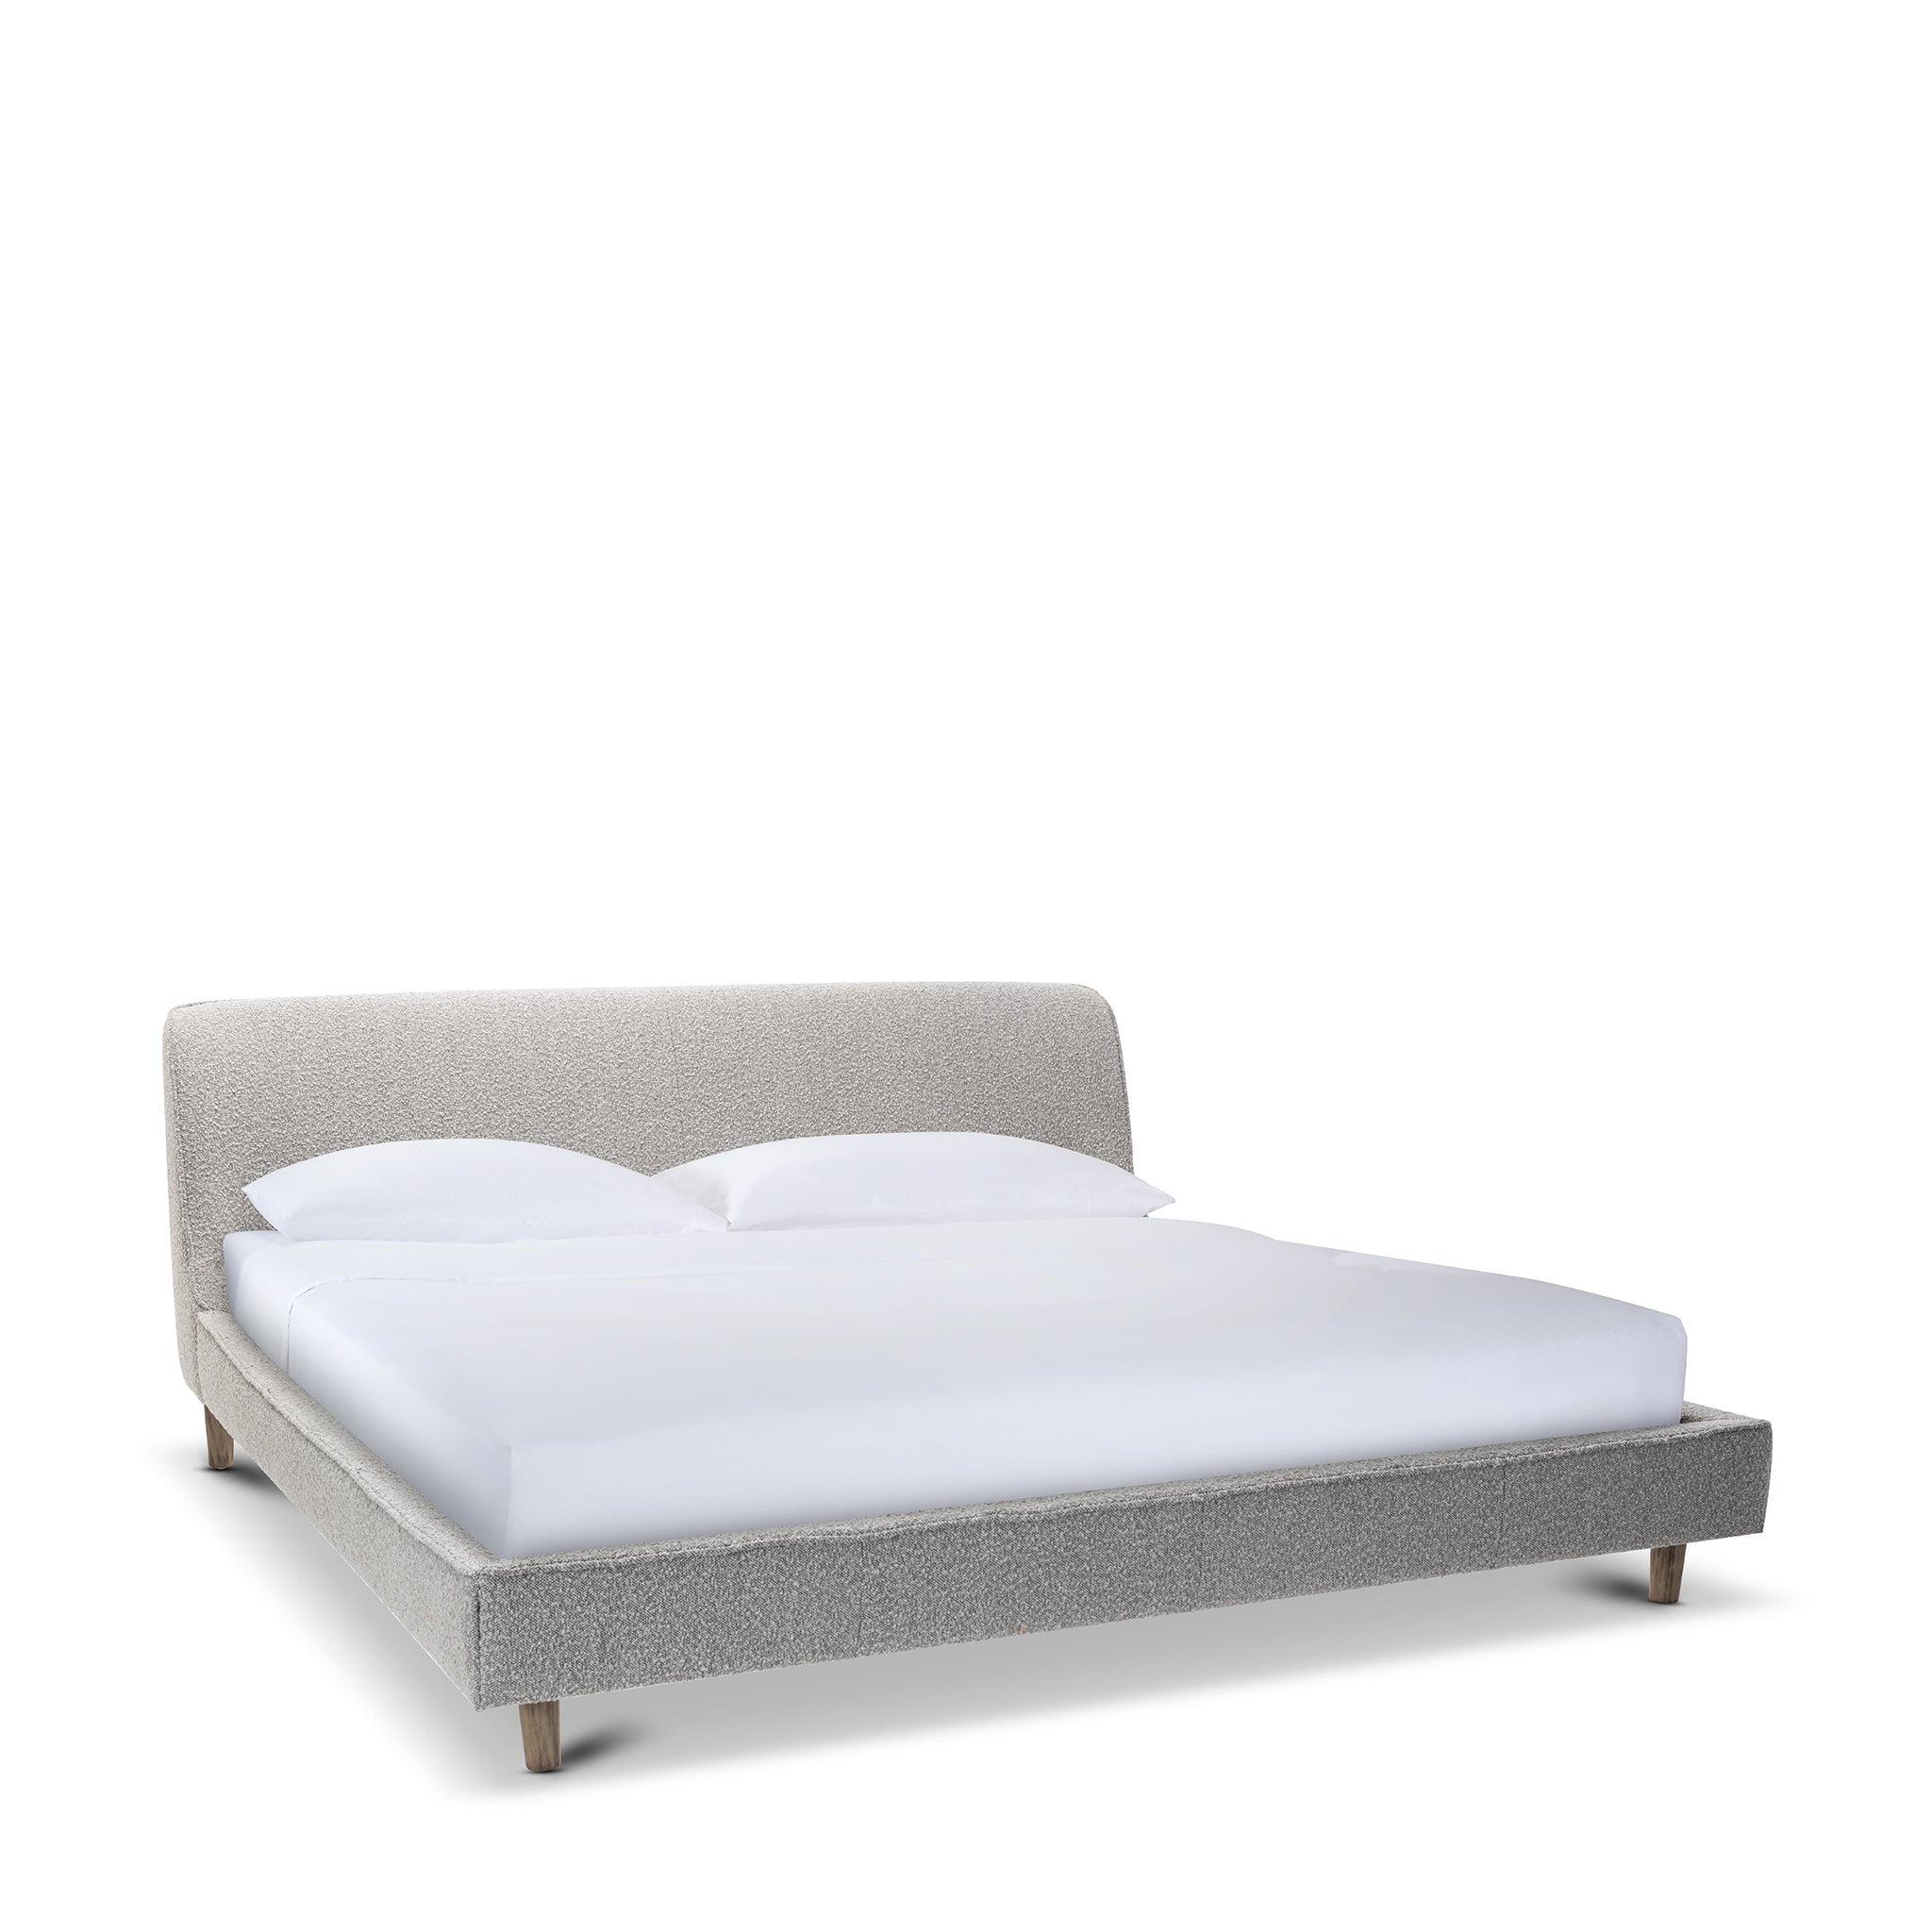 BLAIRE GREY BOUCLE US KING SIZE BED WITH BED SLATS